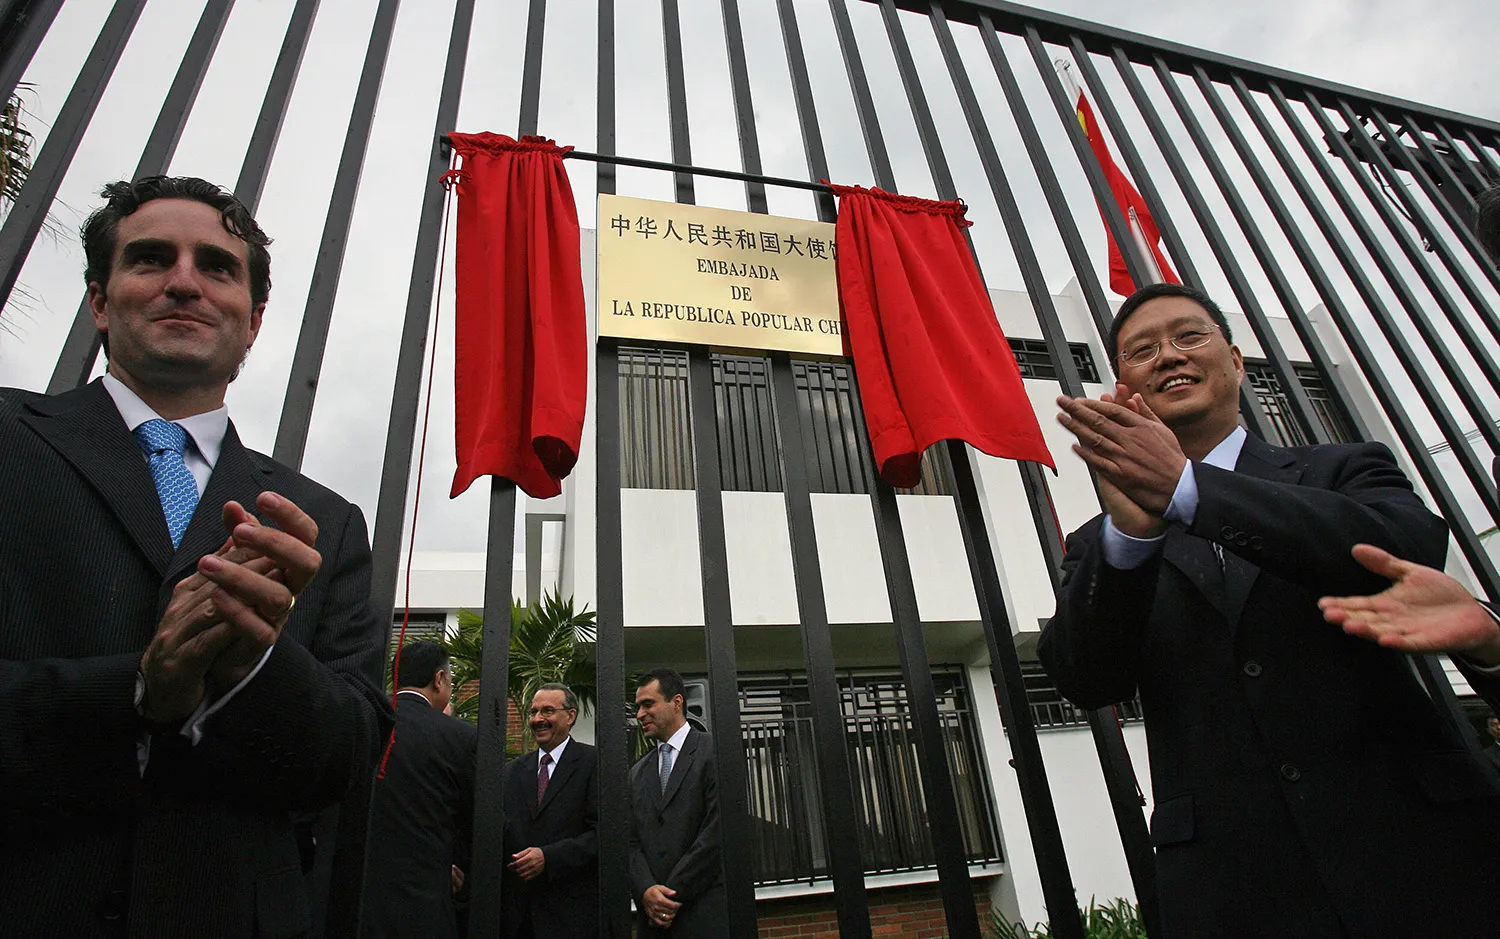 Two men wearing suits clap as they stand in front of a high barred fence. A gold placard with word in Chinese and Spanish hands on the fence with a red curtain parted to reveal it. A building and three other men are seen behind the fence.